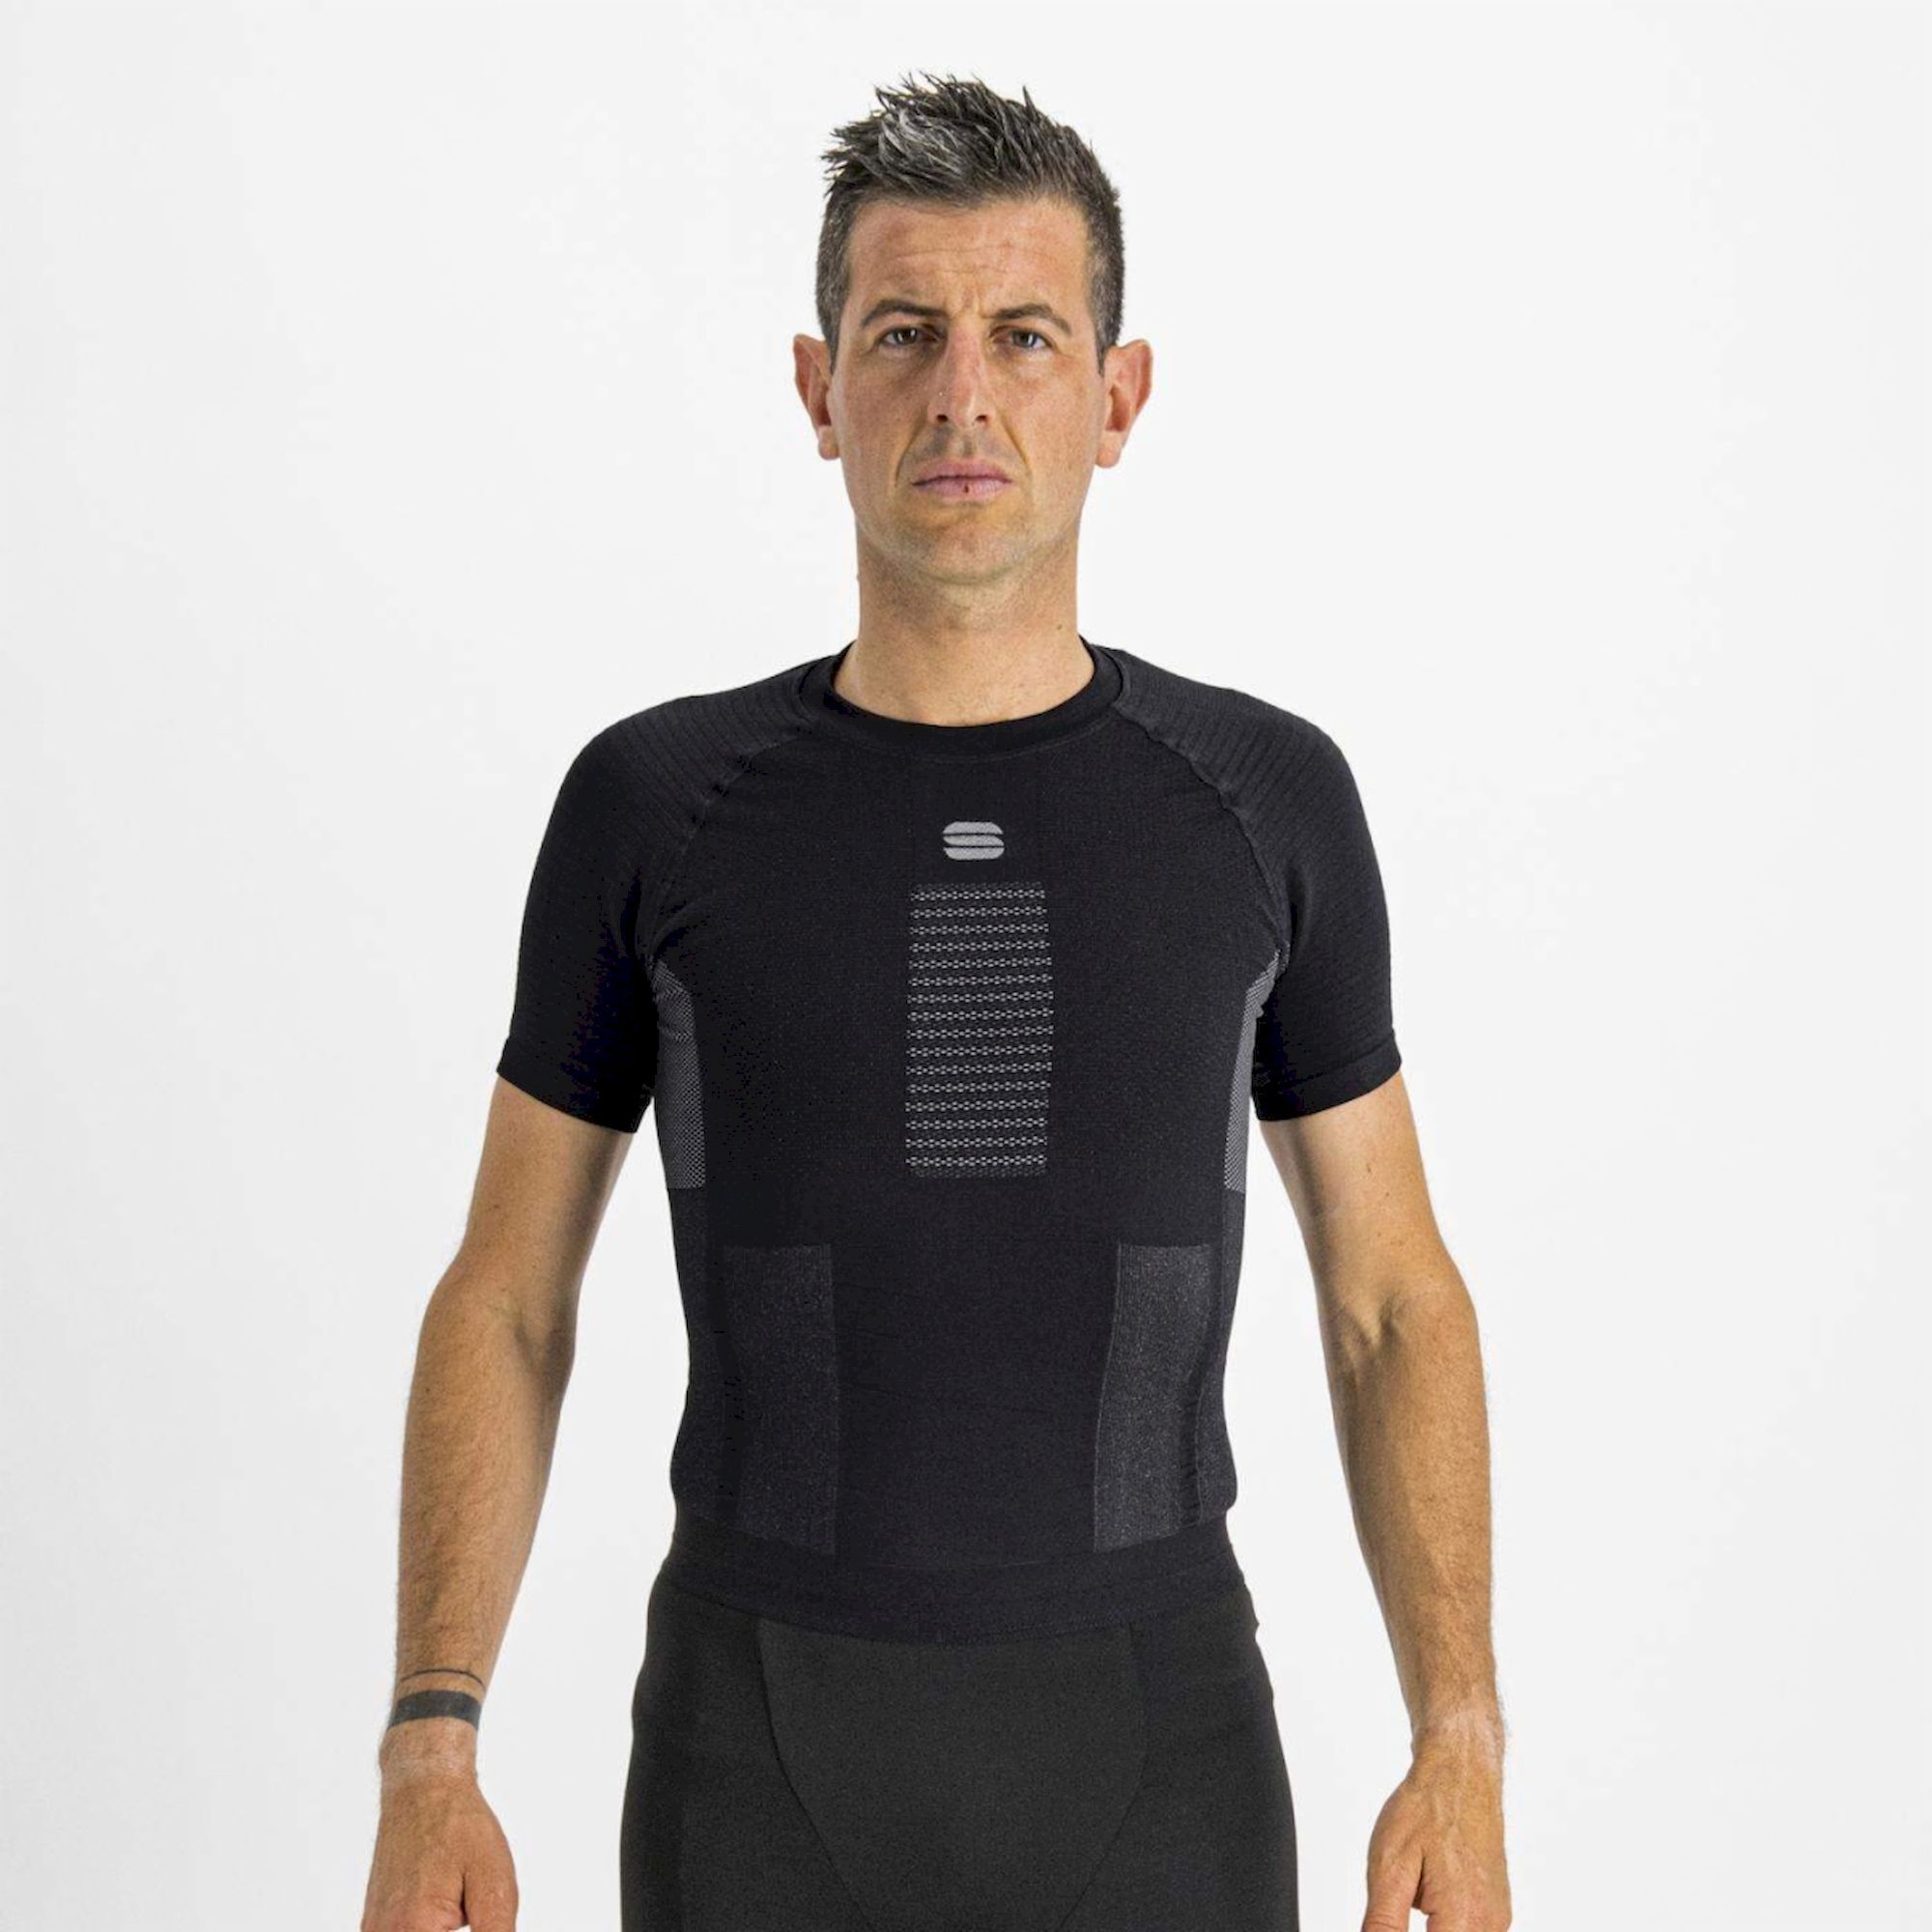 https://images.hardloop.fr/424748/sportful-2nd-skin-tee-sous-vetement-thermique-homme.jpg?w=auto&h=auto&q=80